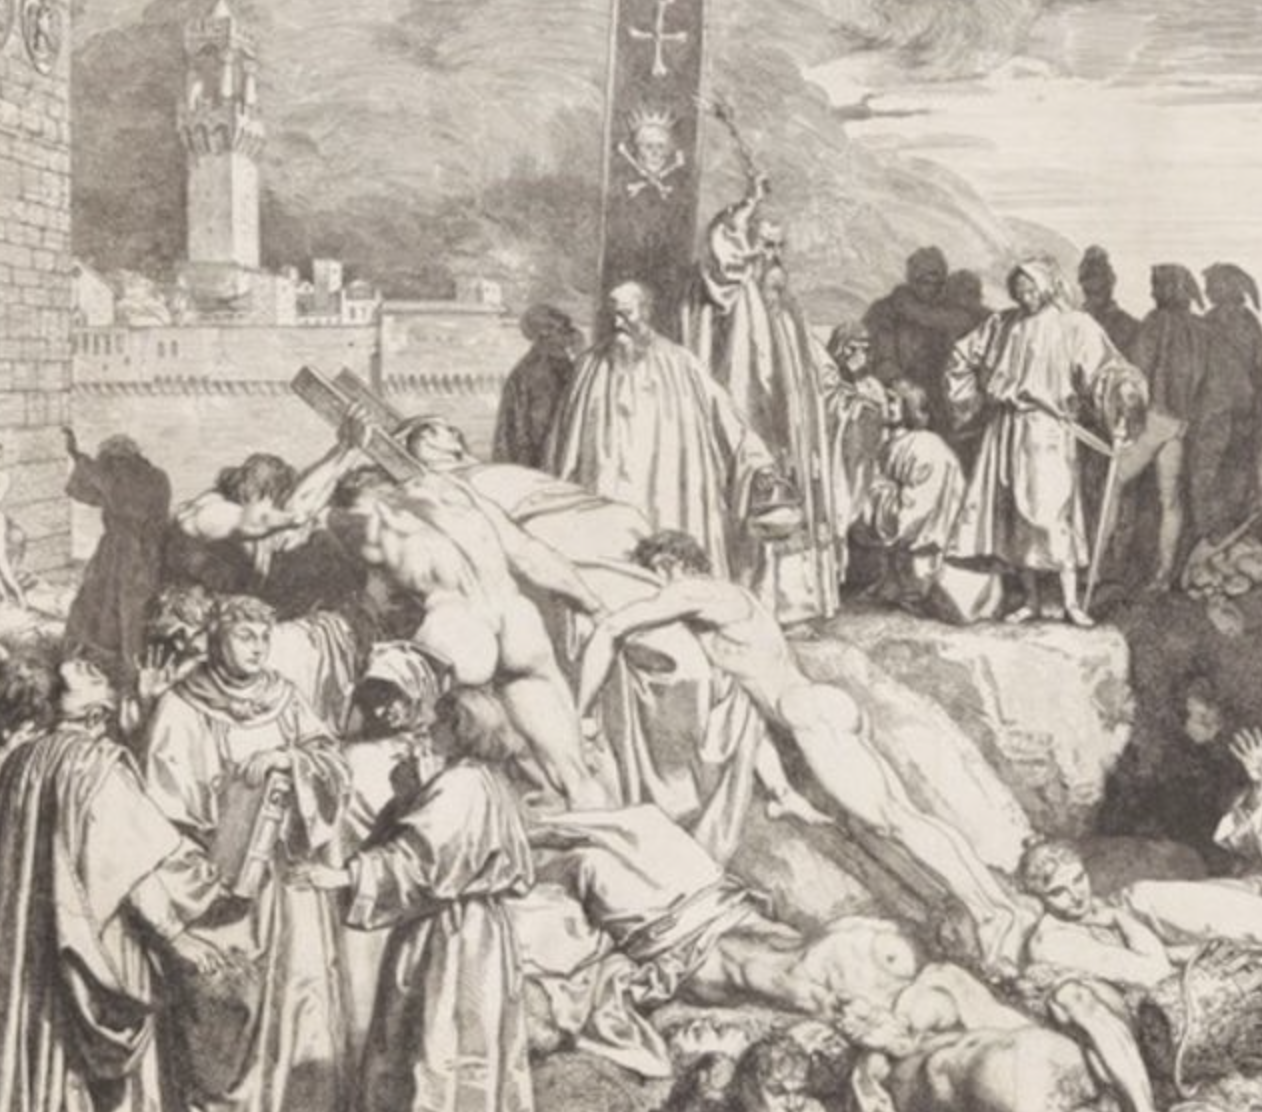 The plague found in the Bronze Age skeletons lacked key genes that the strain which caused the Black Death had&period;